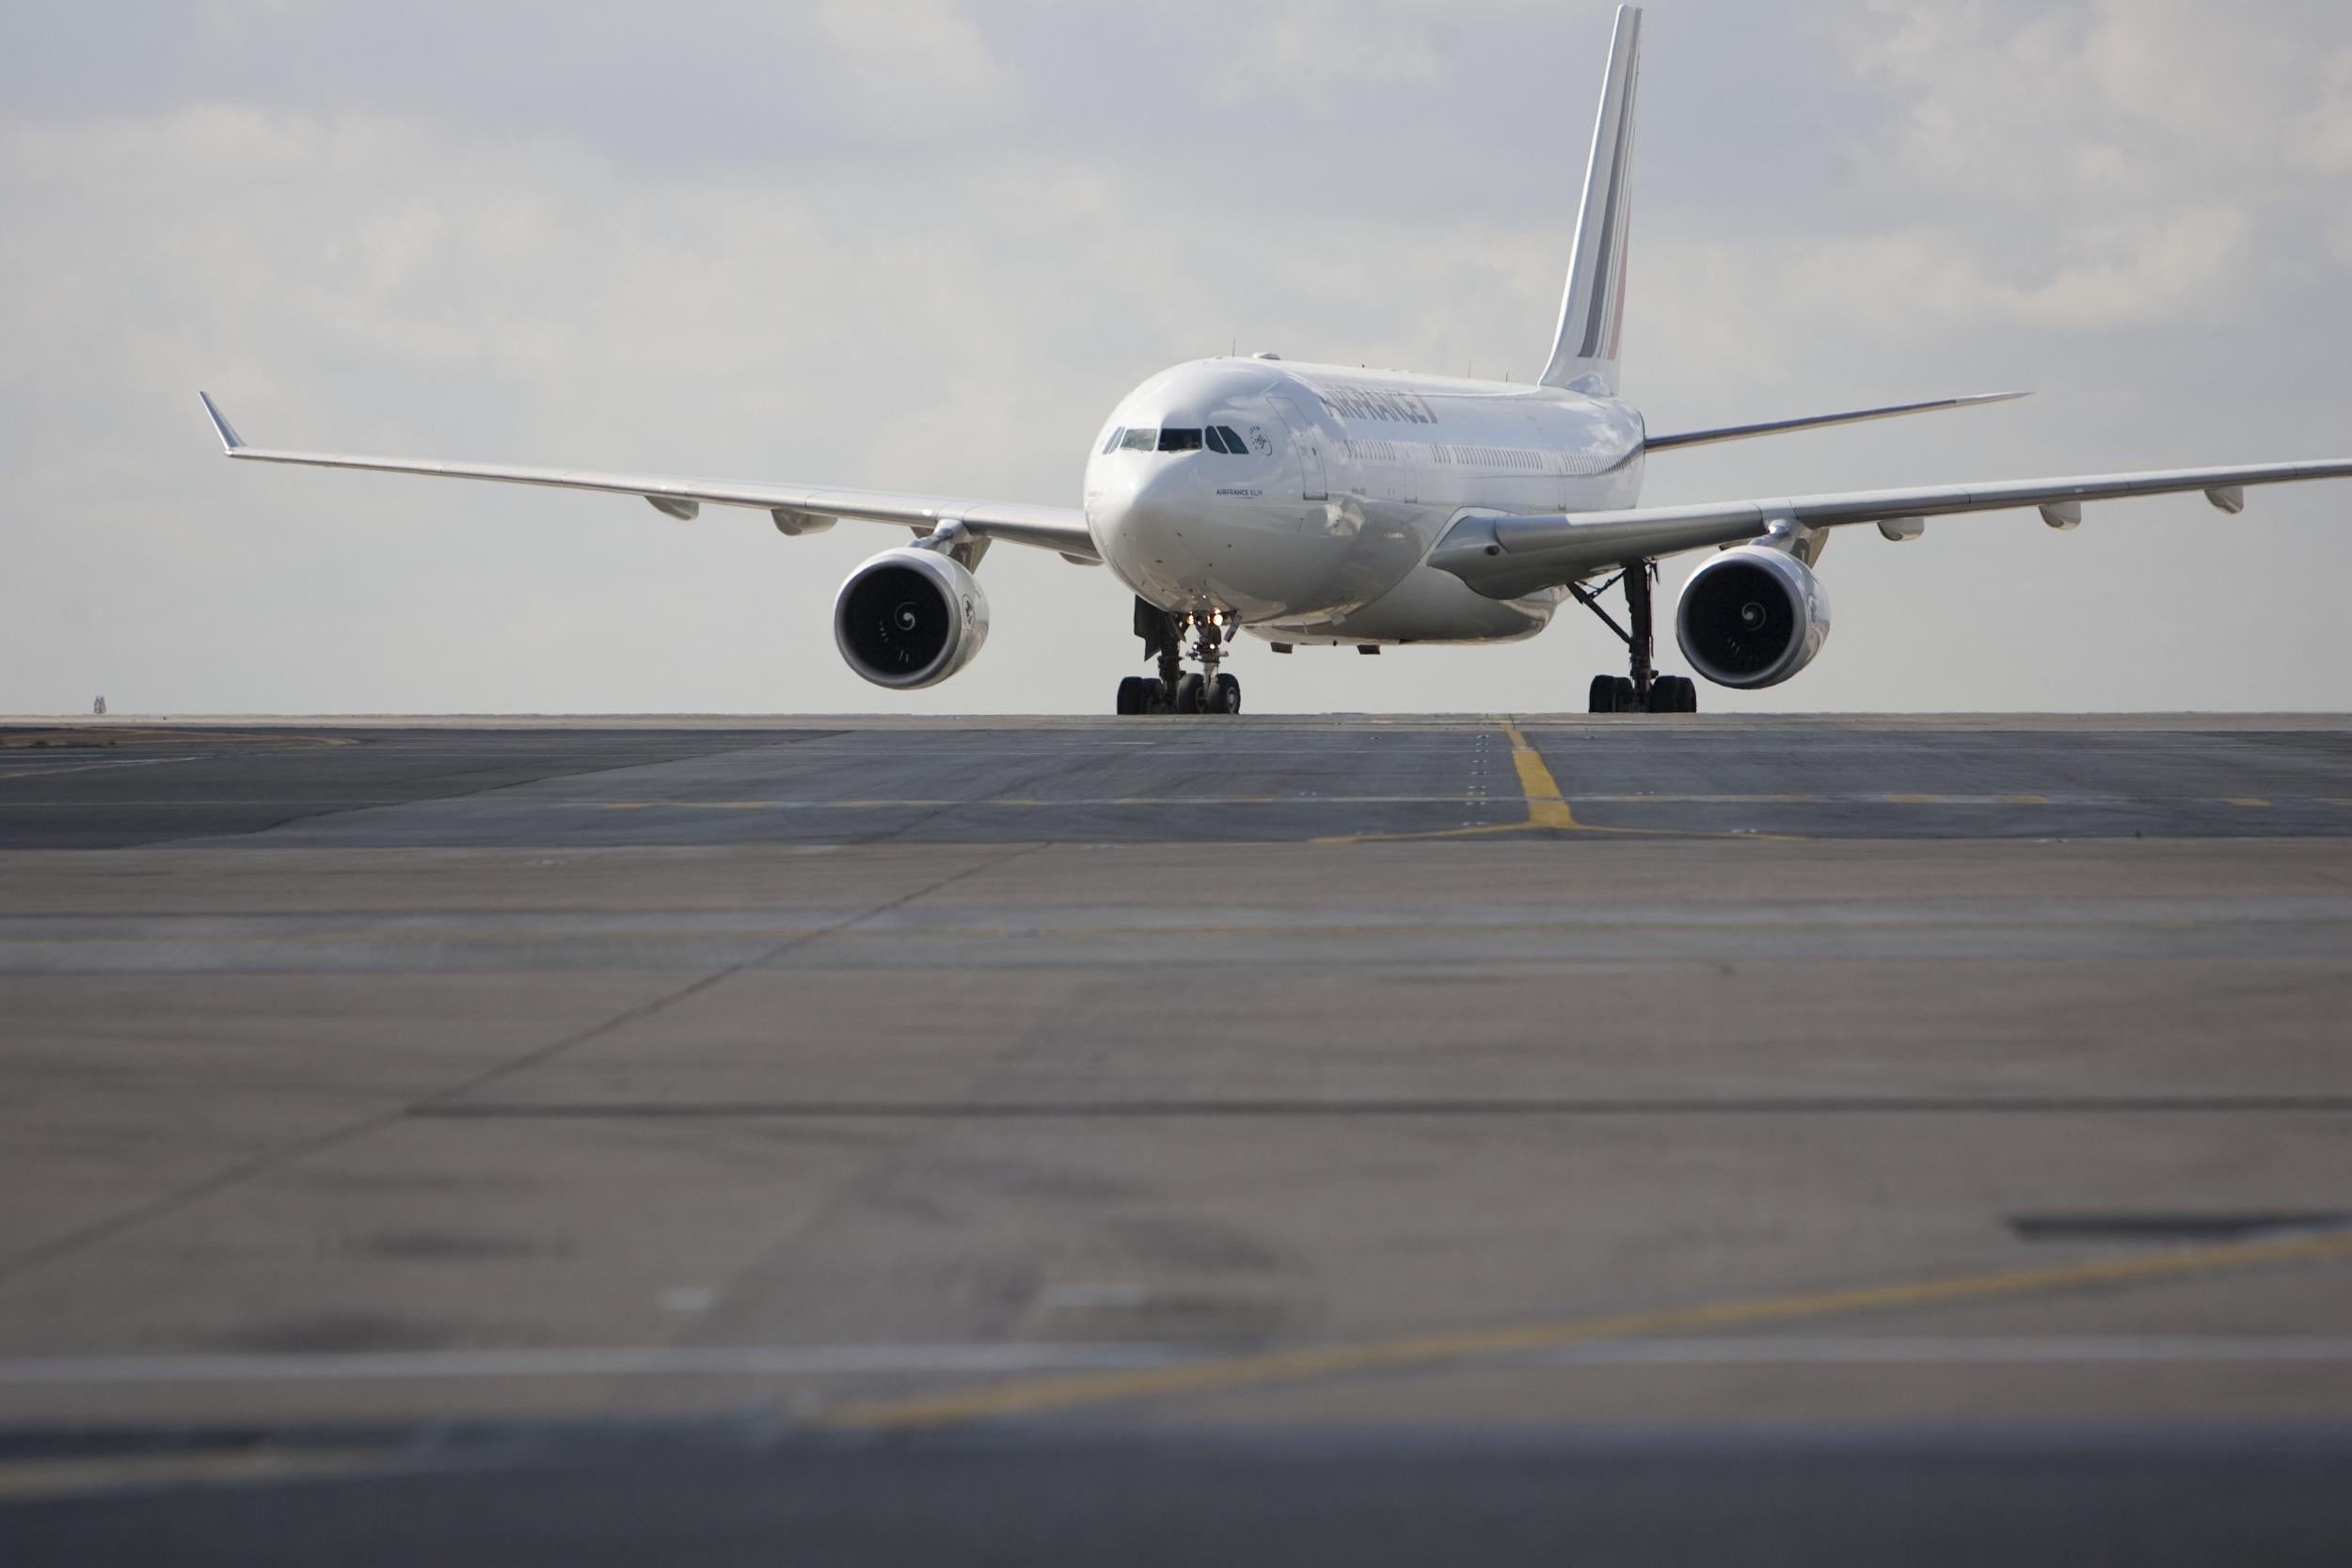 Air France aims to use more biofuels